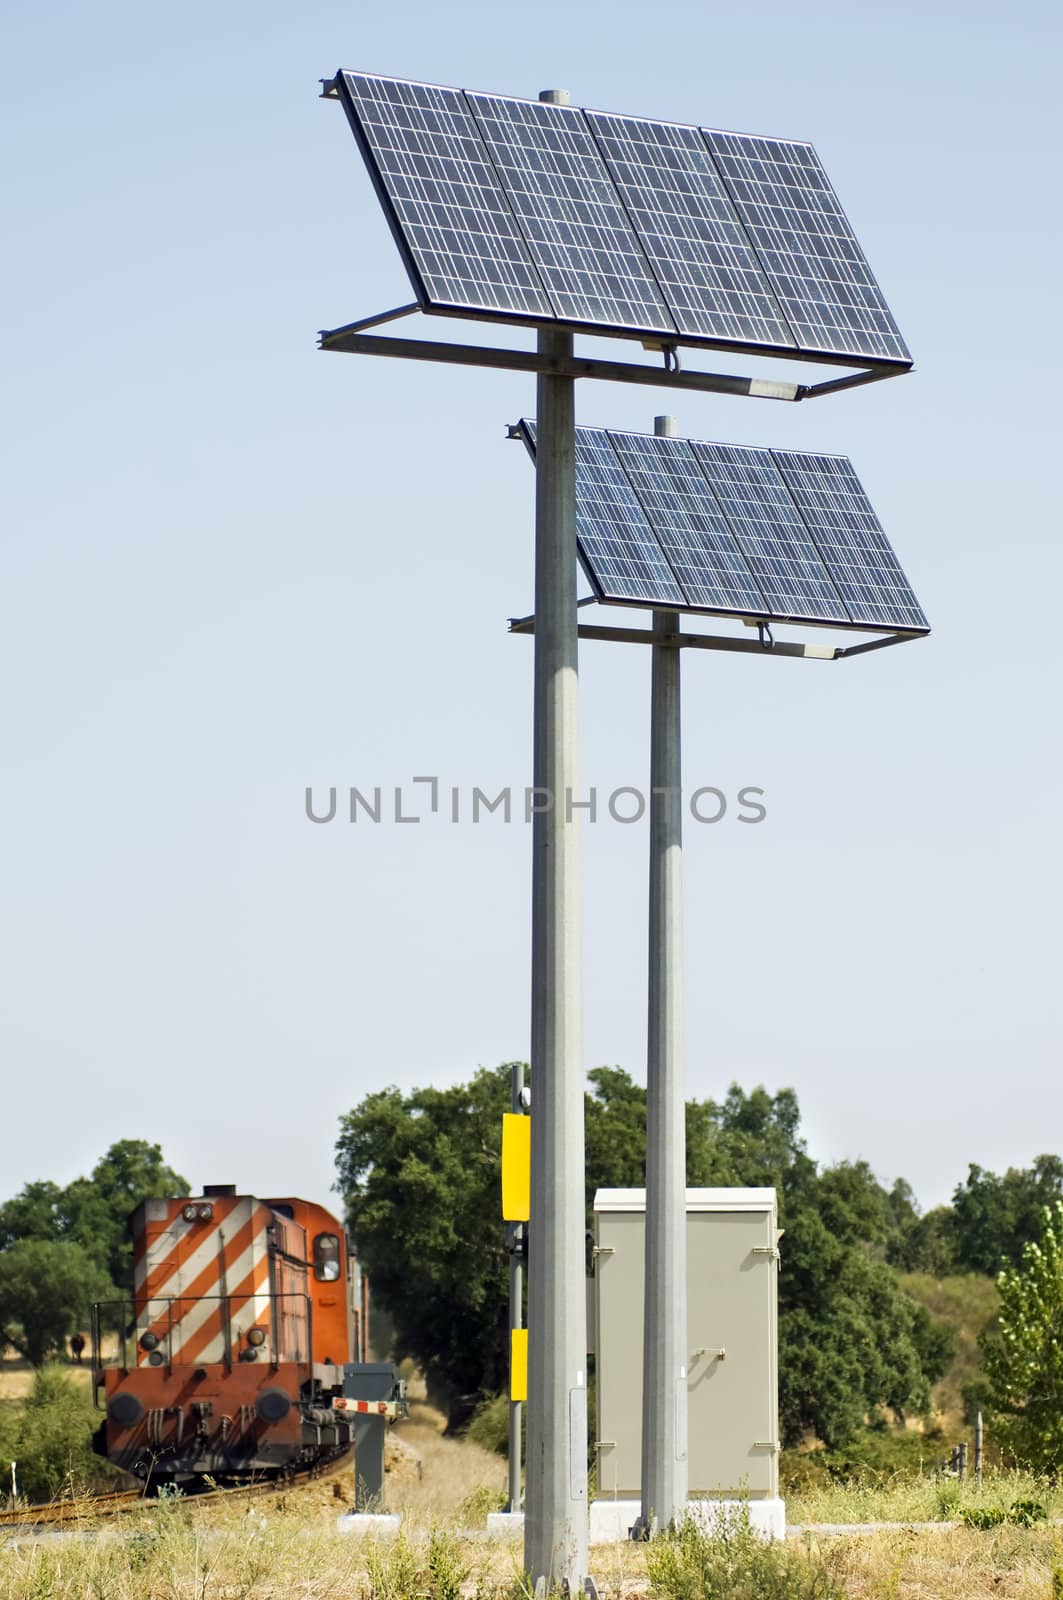 A view of two large solar panels used to power signals and safety equipment associated with a railroad crossing.